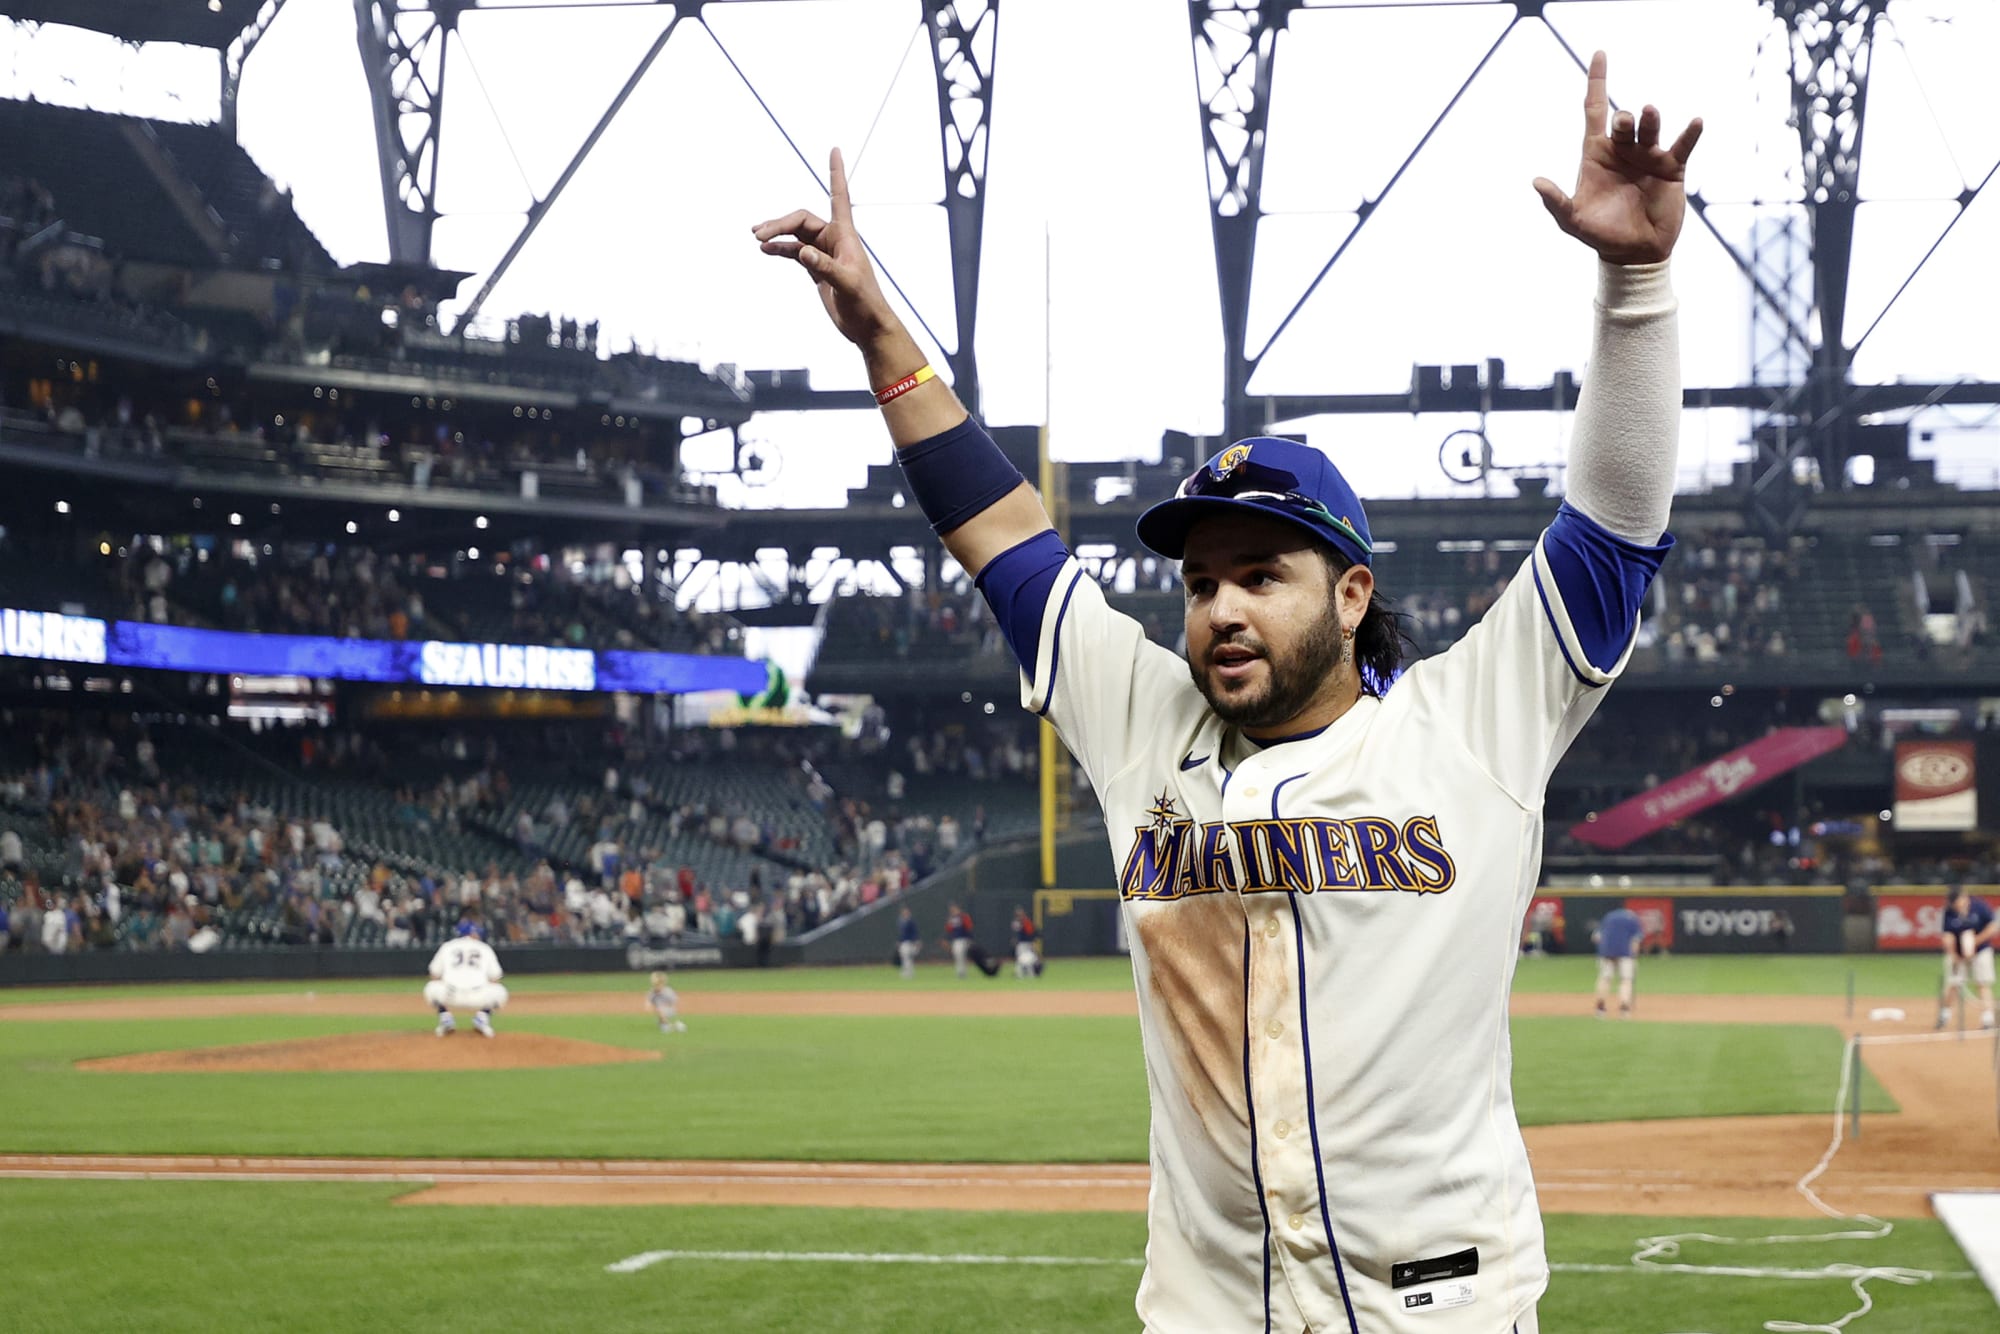 Mariners win wild game against Braves thanks to Julio and Geno